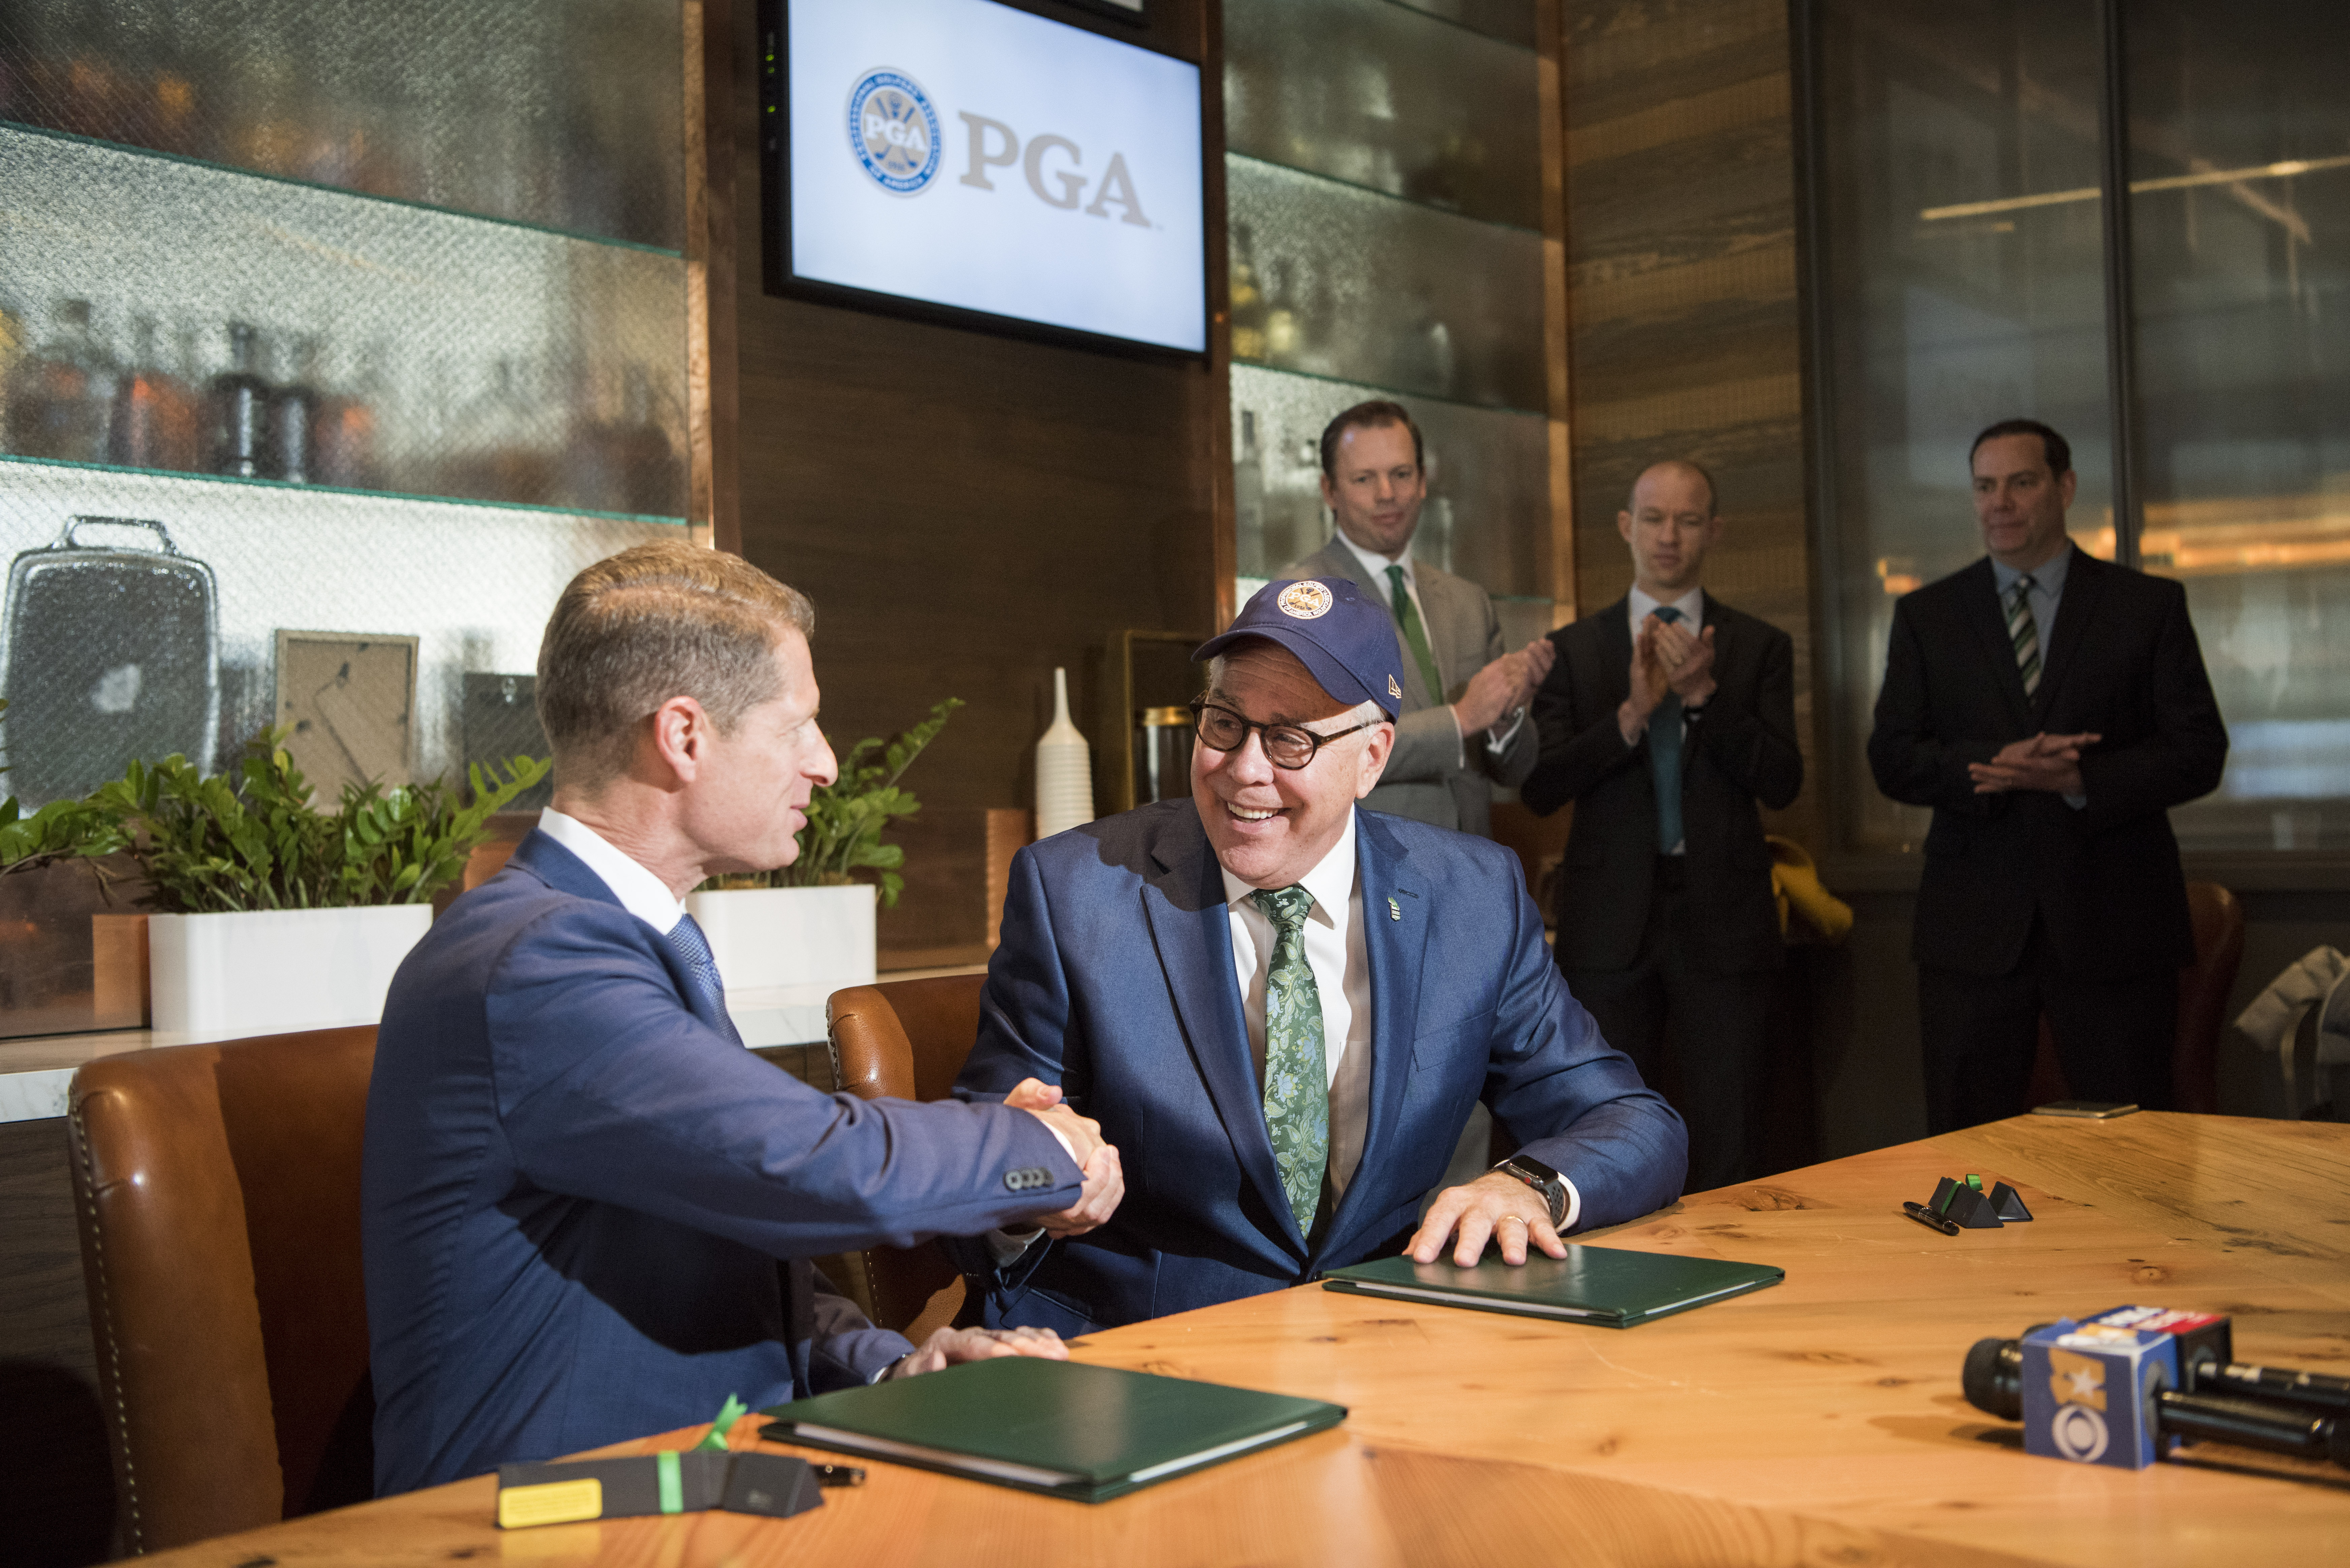 PGA Chief Operating Officer Darrell Crall and UNT President Neal Smatresk